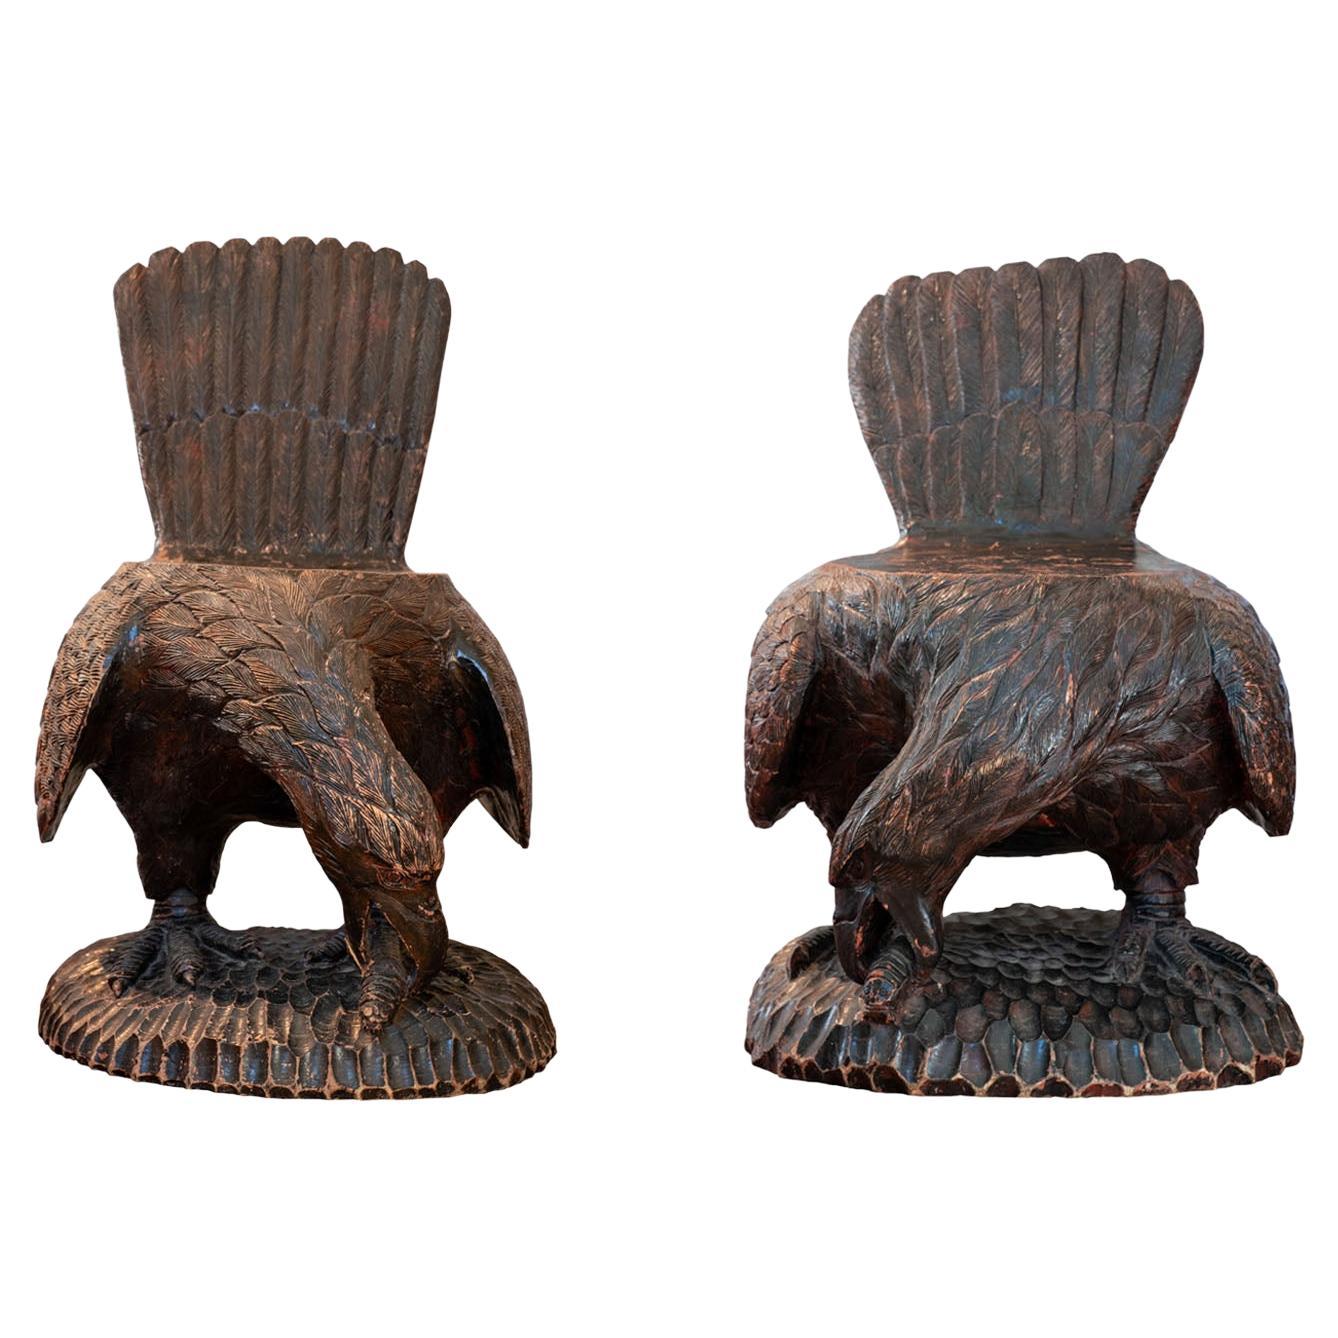 Pair of 18th Century Venetian Carved Eagle Chairs or Benches For Sale